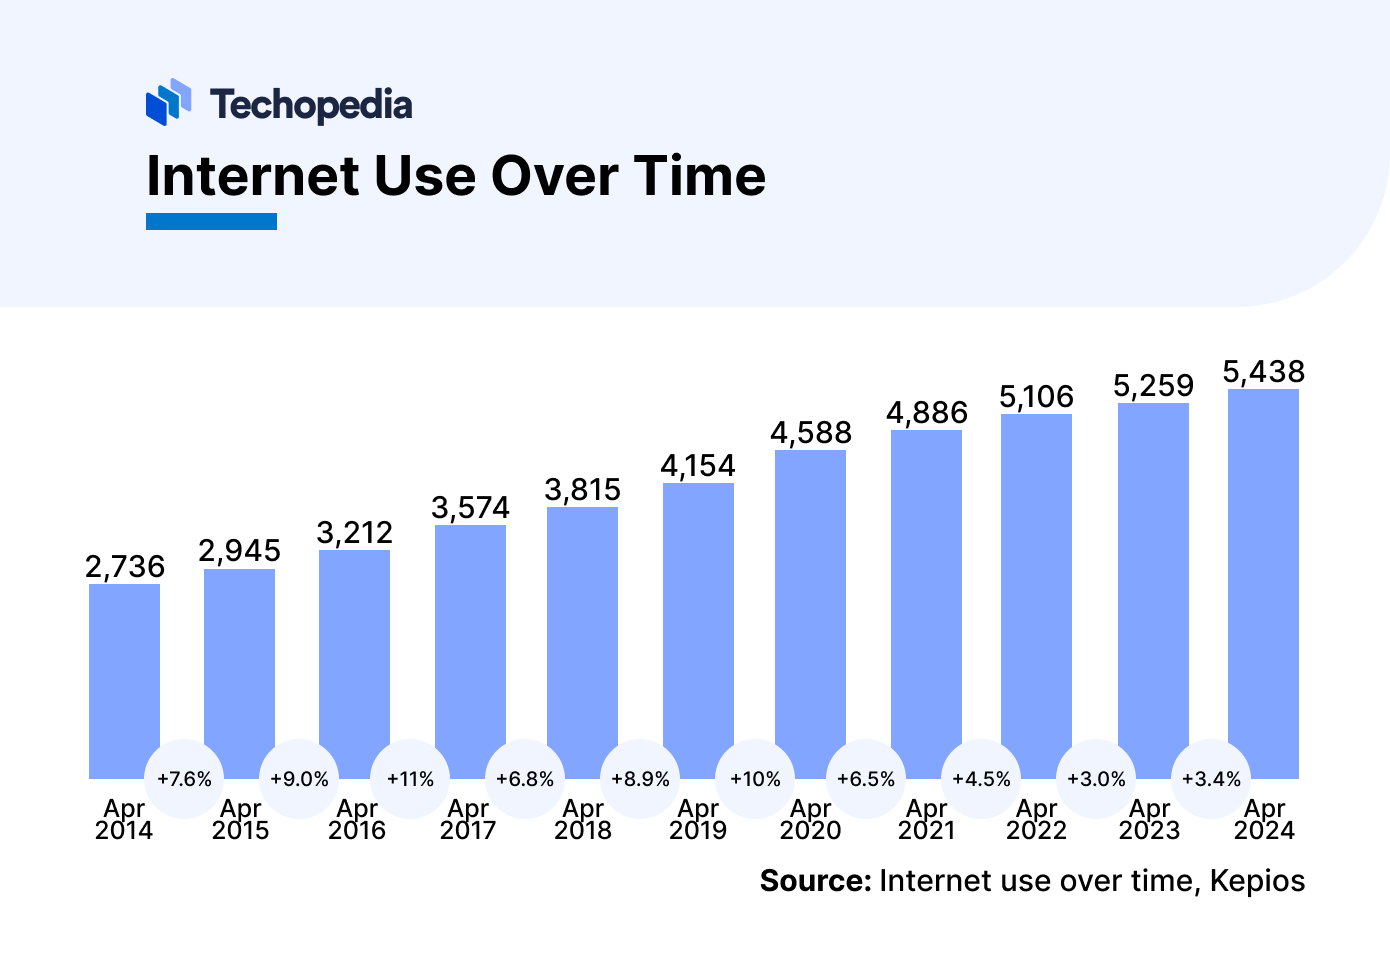 A chart showing the use of internet over time